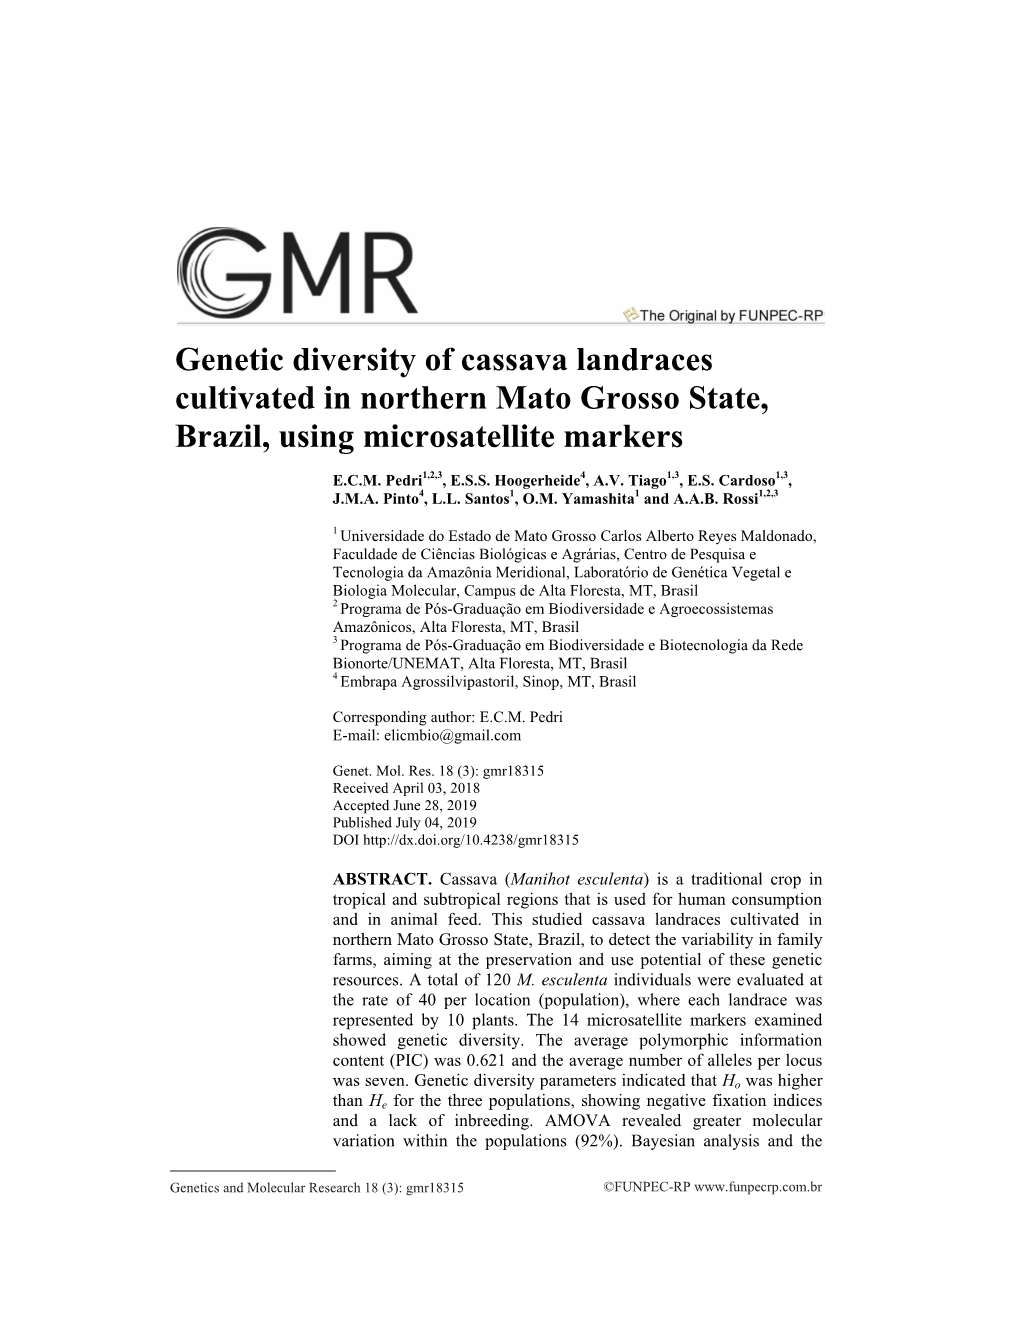 Genetic Diversity of Cassava Landraces Cultivated in Northern Mato Grosso State, Brazil, Using Microsatellite Markers